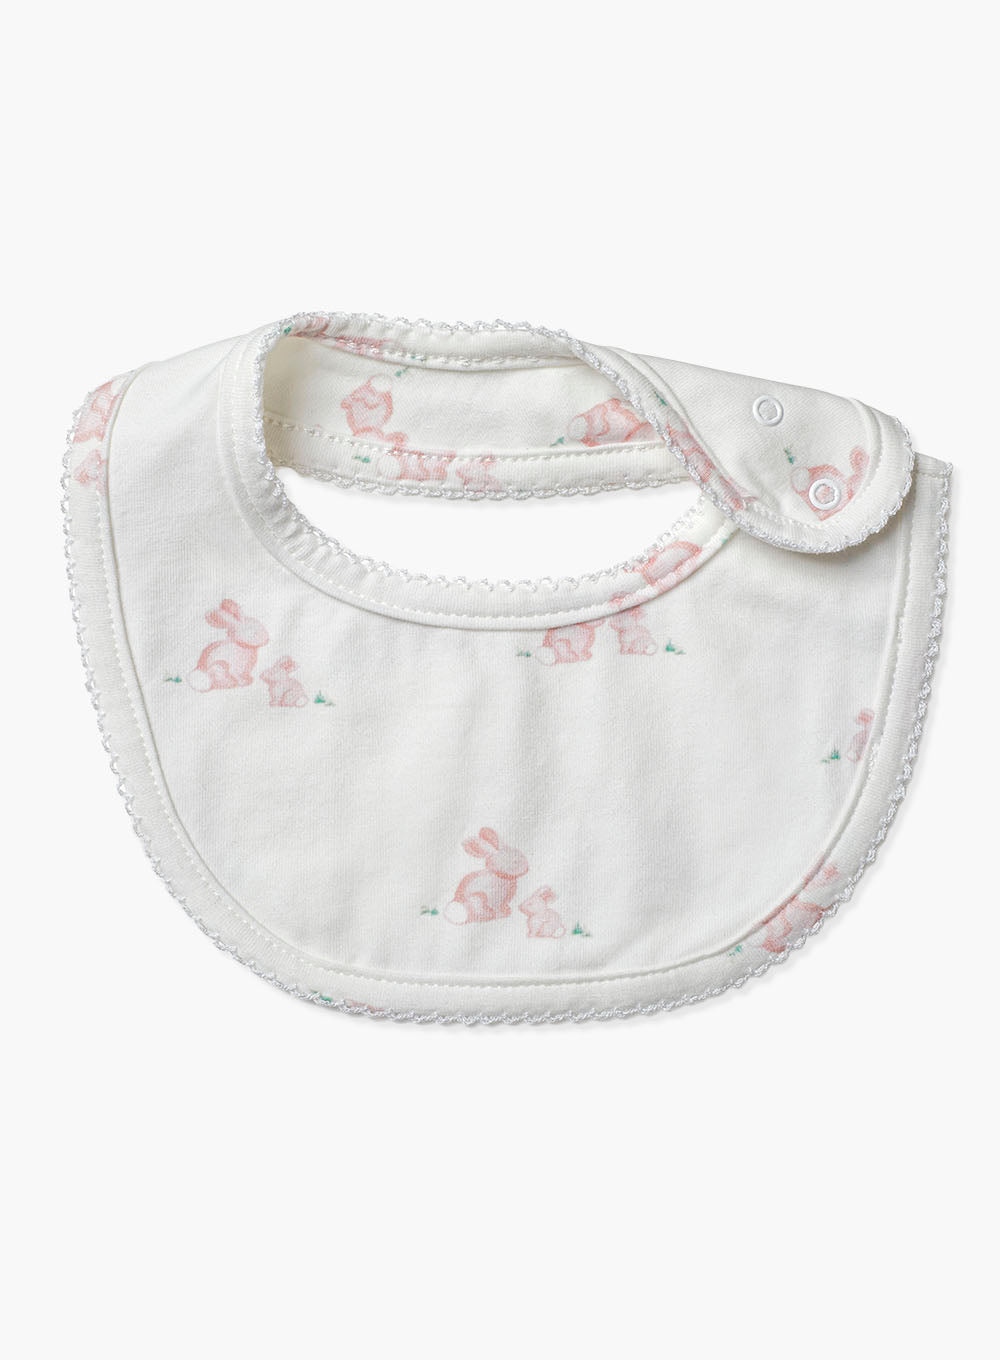 Baby Bib In Pale Pink Bunny